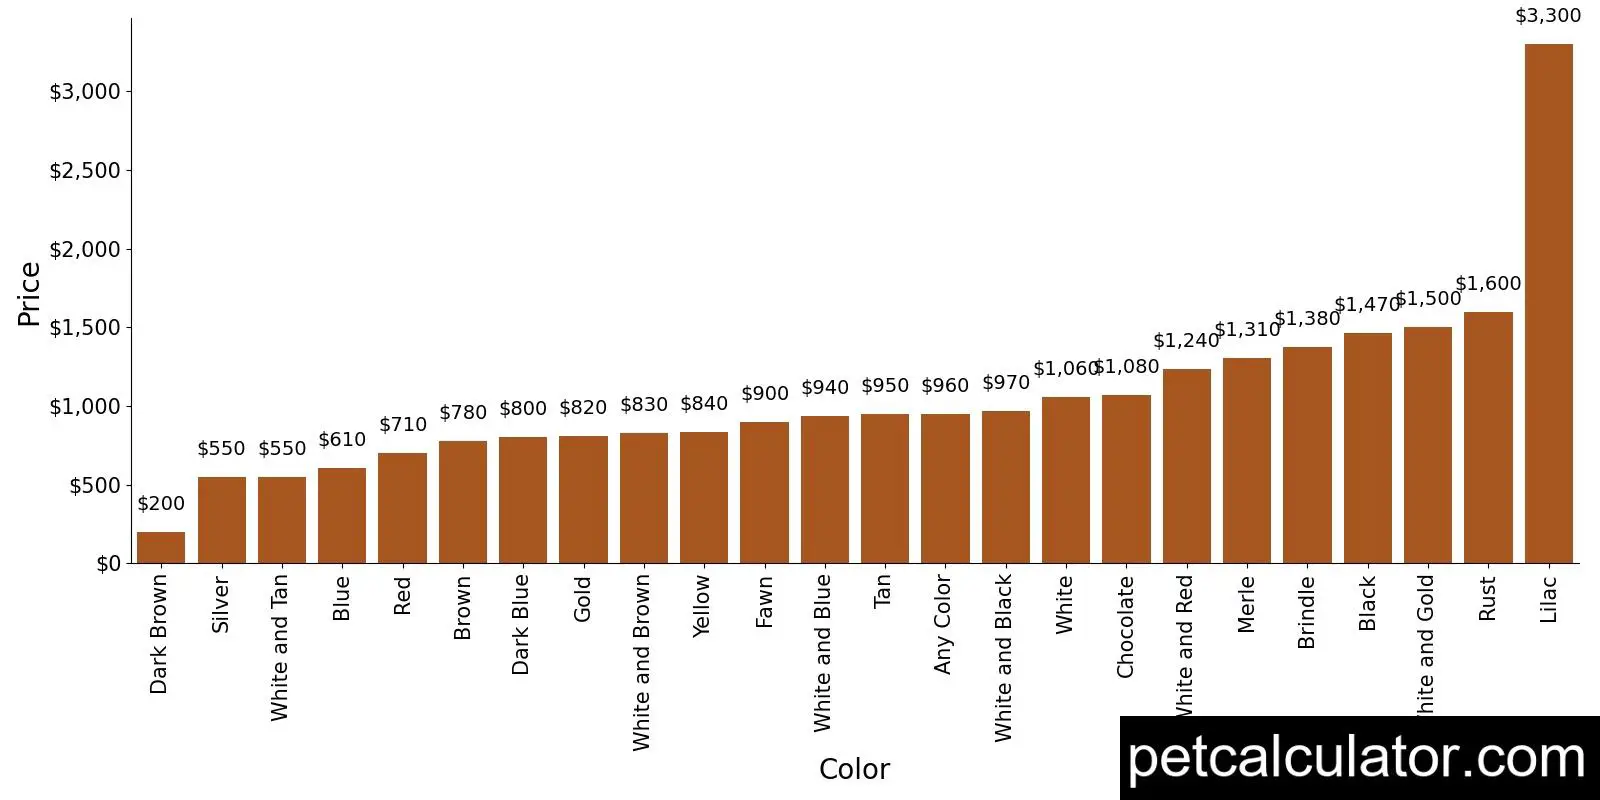 Price of Border Collie by Color 